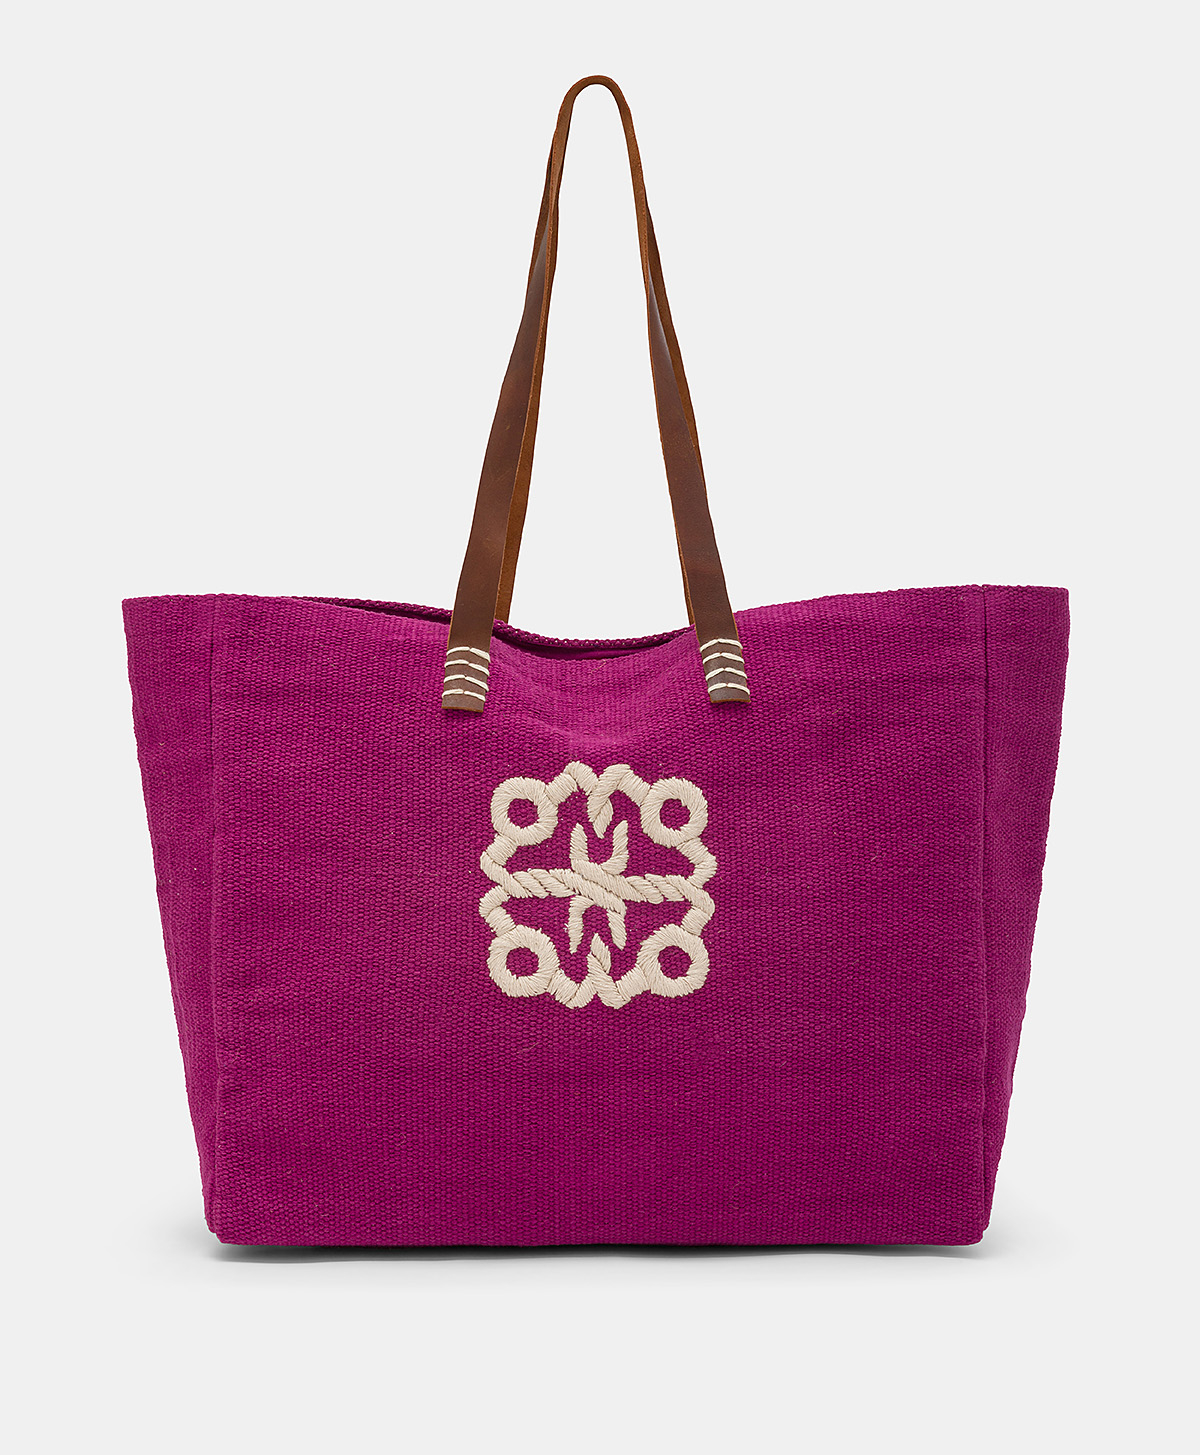 PARAGUAN BAG IN EMBROIDERED CANVAS - CYCLAMEN - Momonì